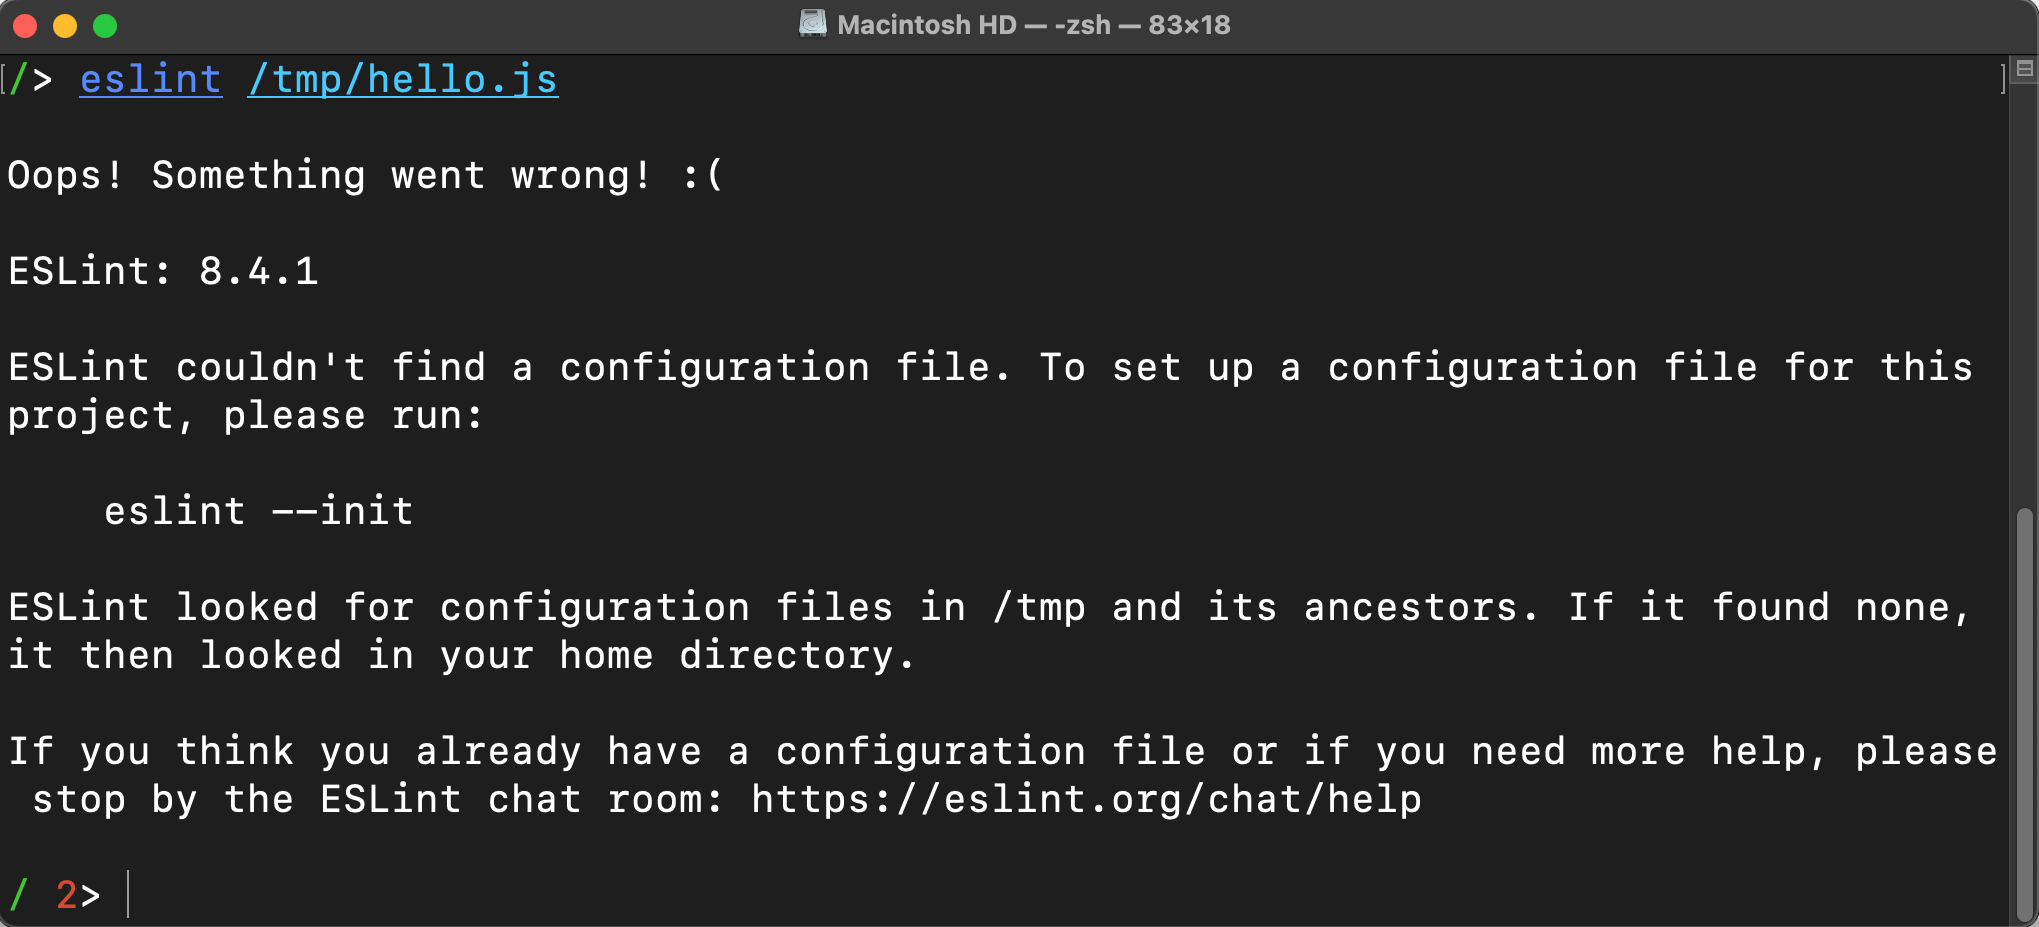 ESLint errors if you are missing an ESLint configuration file